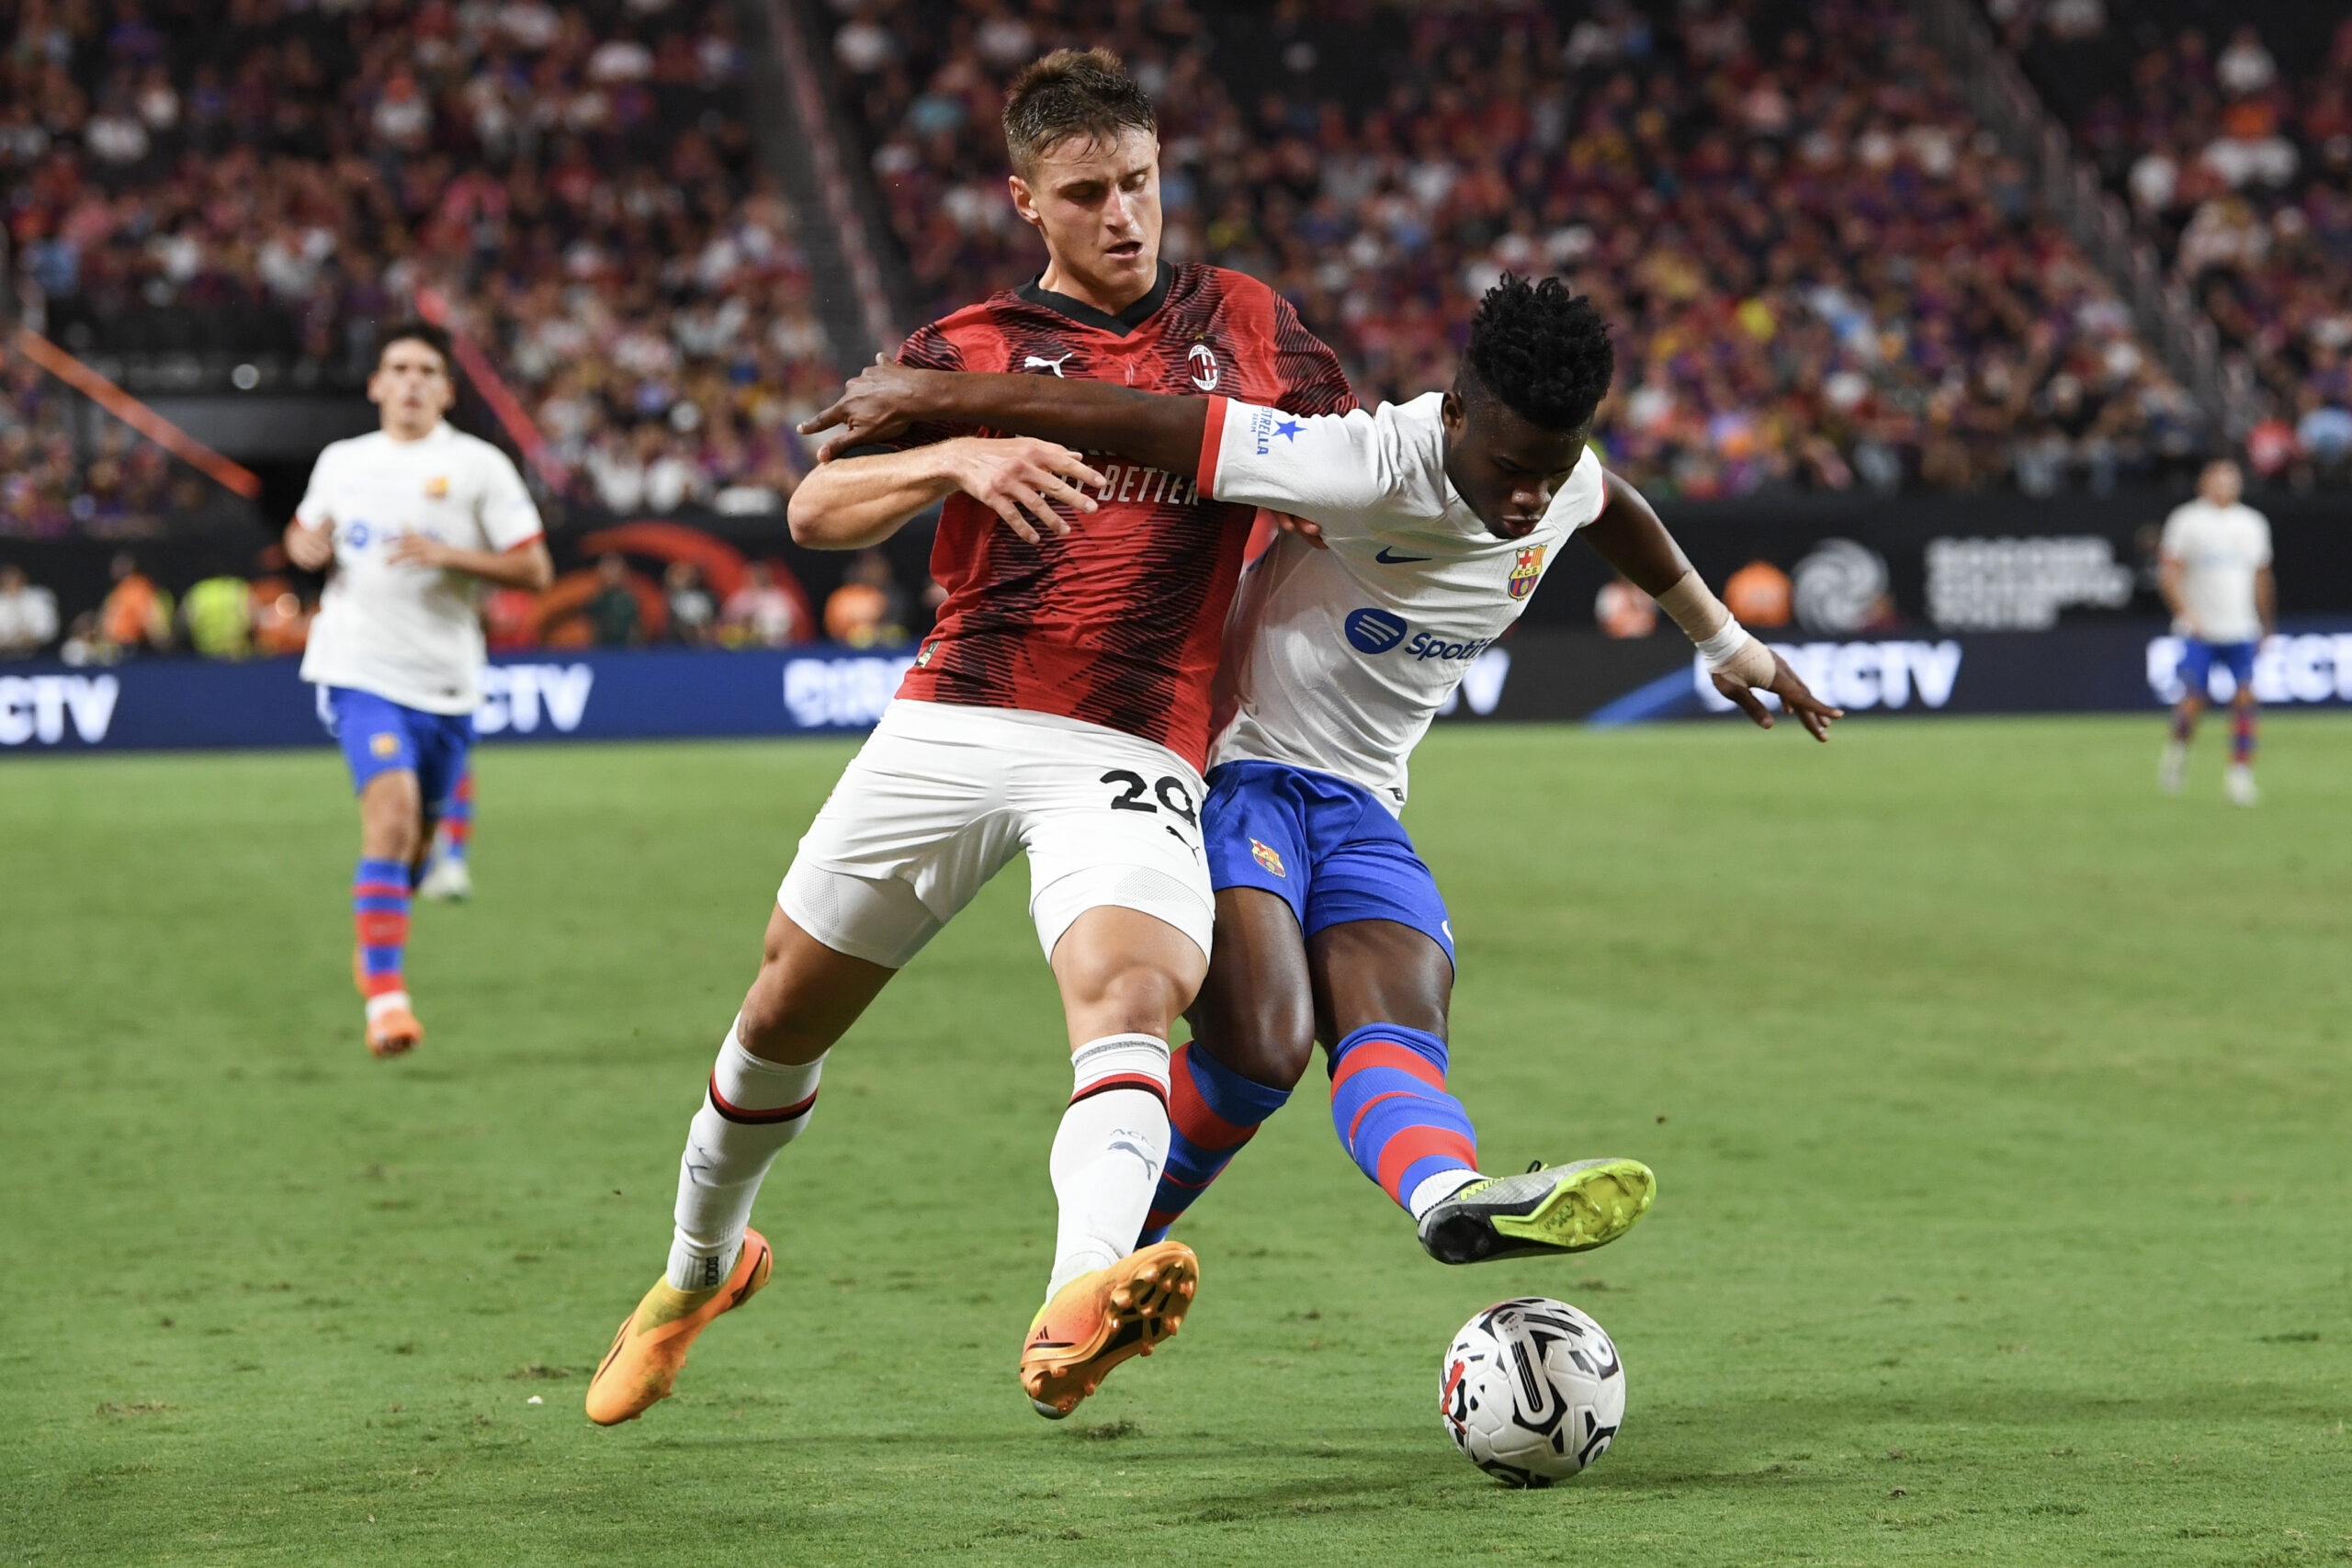 LAS VEGAS, NEVADA - AUGUST 01: Lorenzo Colombo #29 of AC Milan battles for the ball with Mika Faye #30 of FC Barcelona during the second half of a preseason friendly match during the 2023 Soccer Champions Tour at Allegiant Stadium on August 01, 2023 in Las Vegas, Nevada.